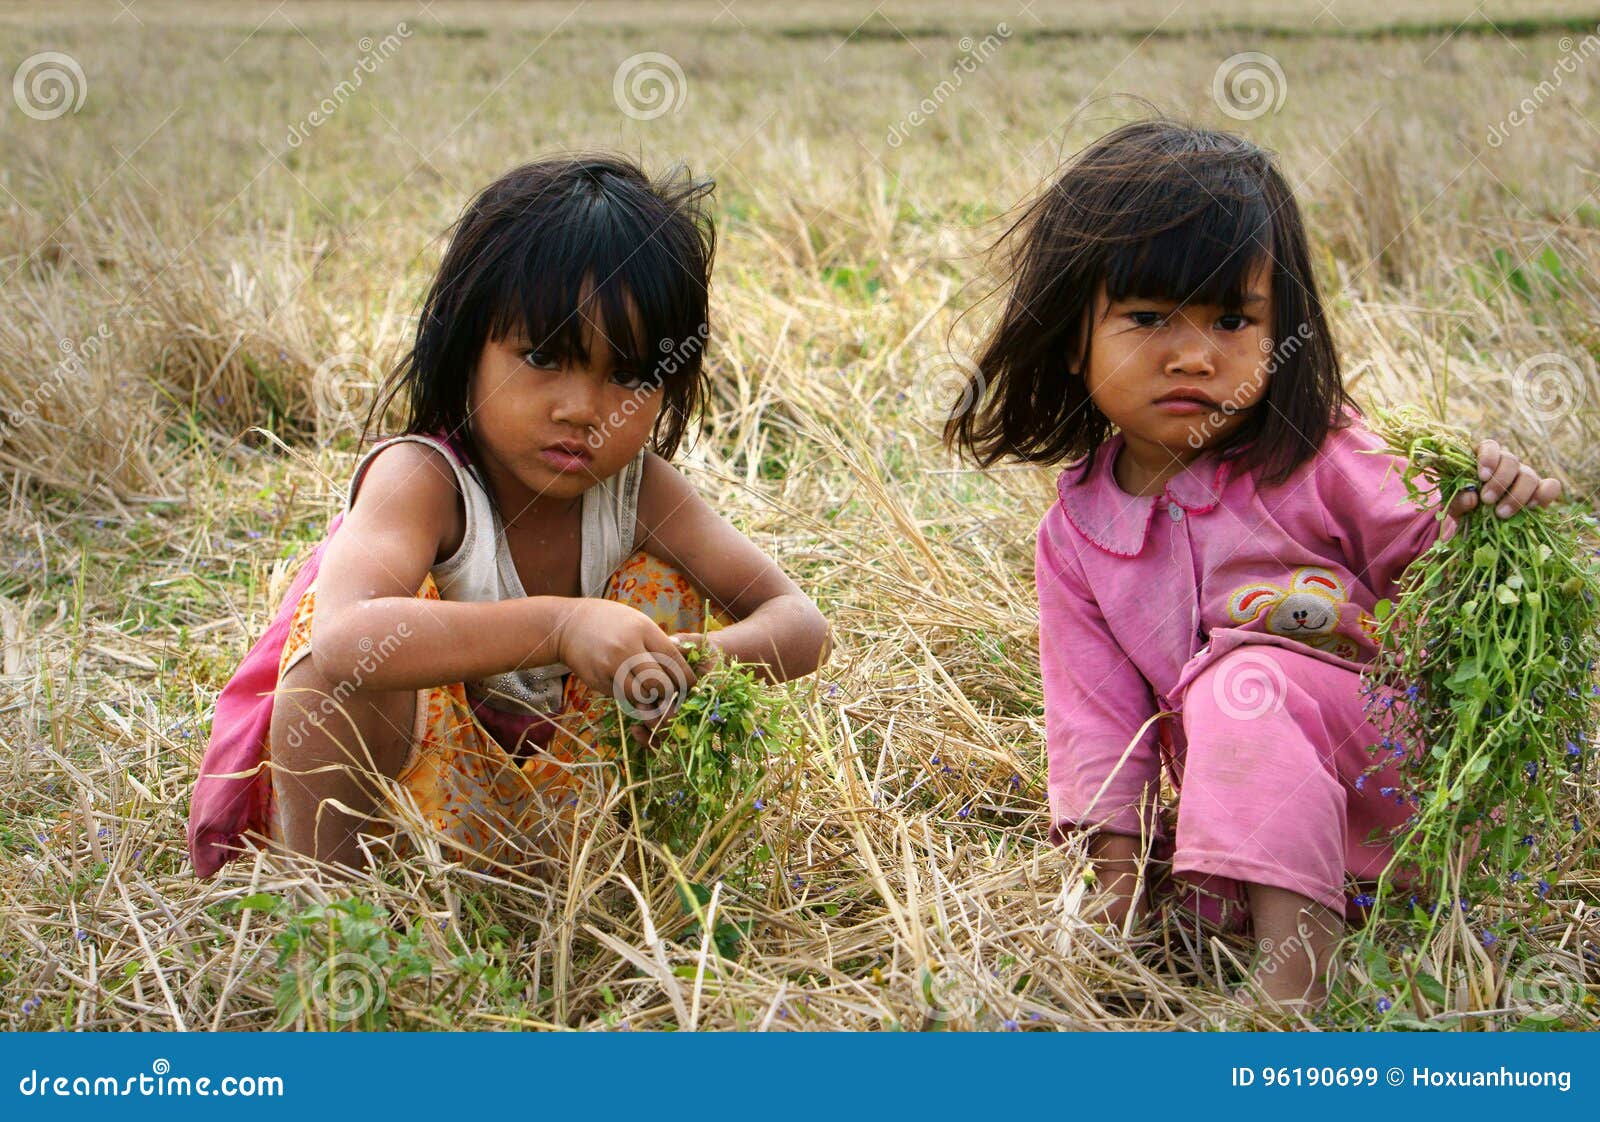 Poor Child on Dry Grass Meadow Editorial Stock Image - Image of protect ...